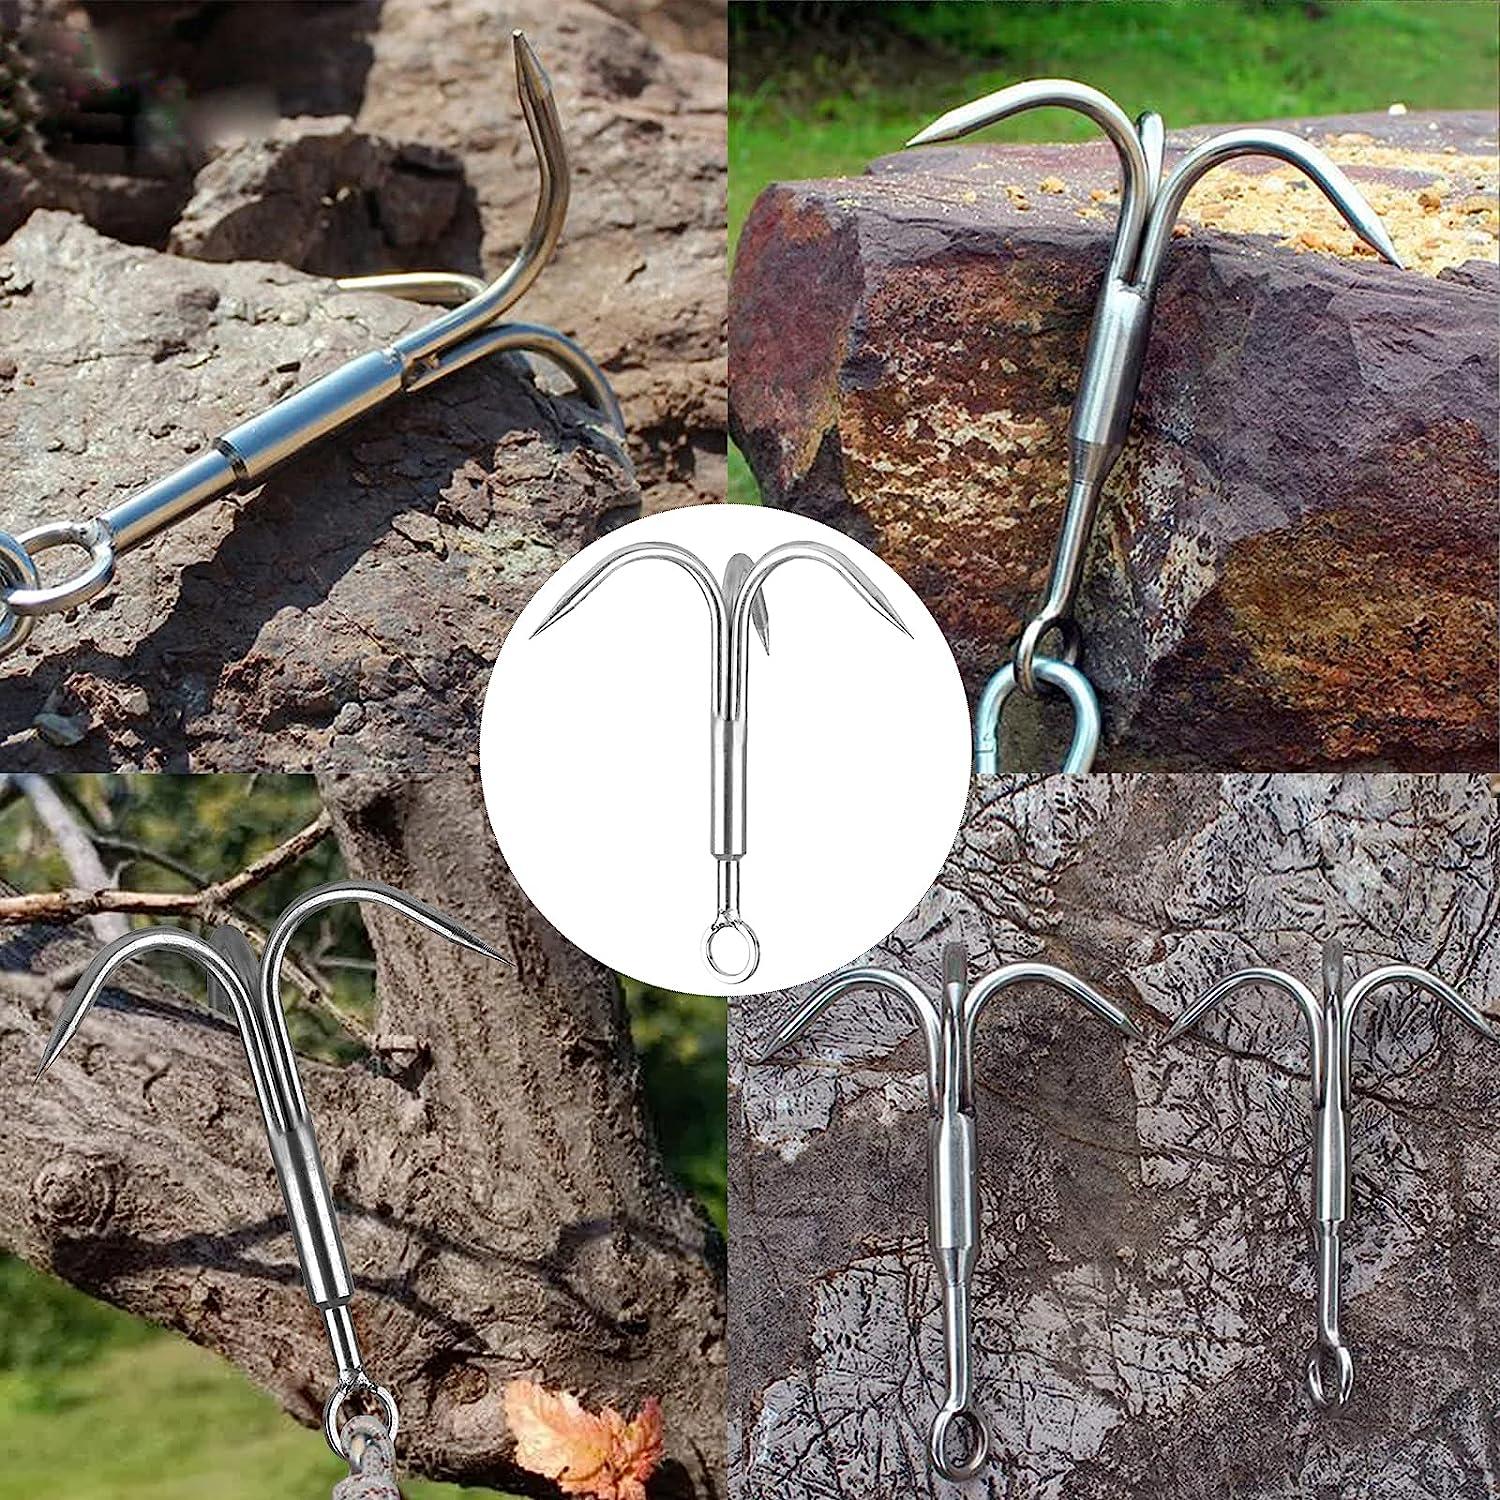 Yiliaw Stainless Steel Outdoor Grappling Hook with 50FT Rope/Climbing  Claw/Gravity Hook/Flying Tigers/Aquatic Anchor Hook for Your Outdoor  Life,Hiking,Tree Limb Removal Big Grappling Hook